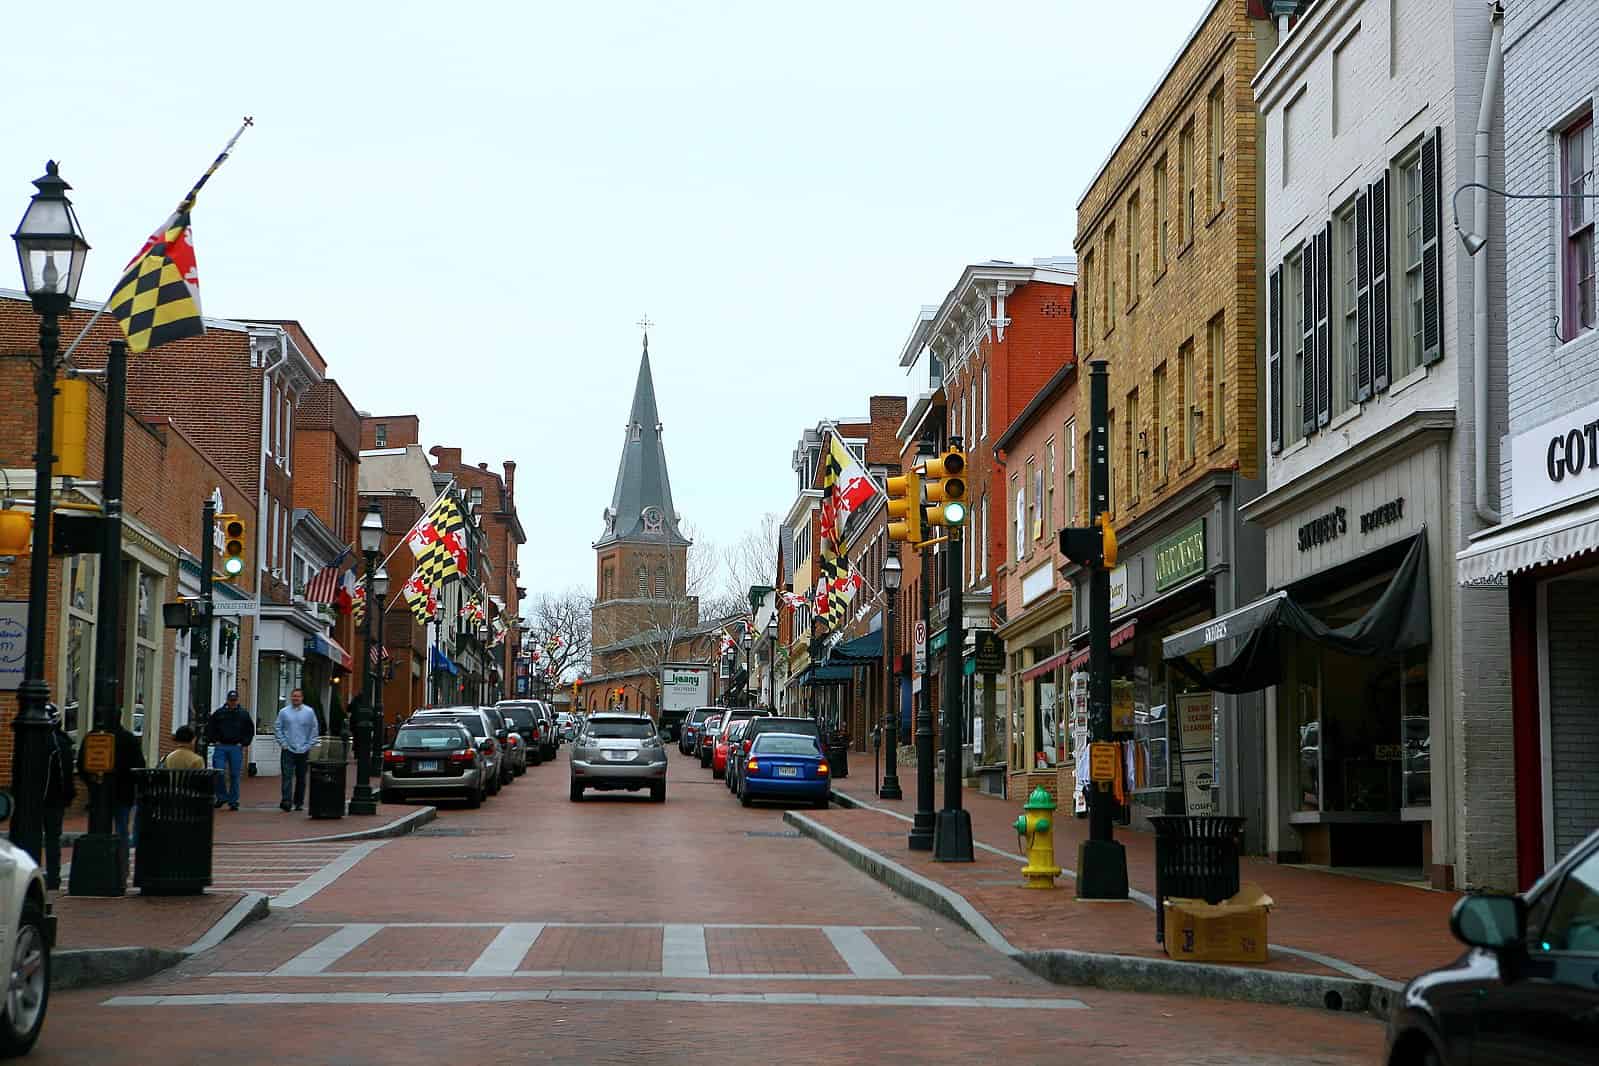 Downtown Annapolis (image courtesy of Flickr user high limitzz)